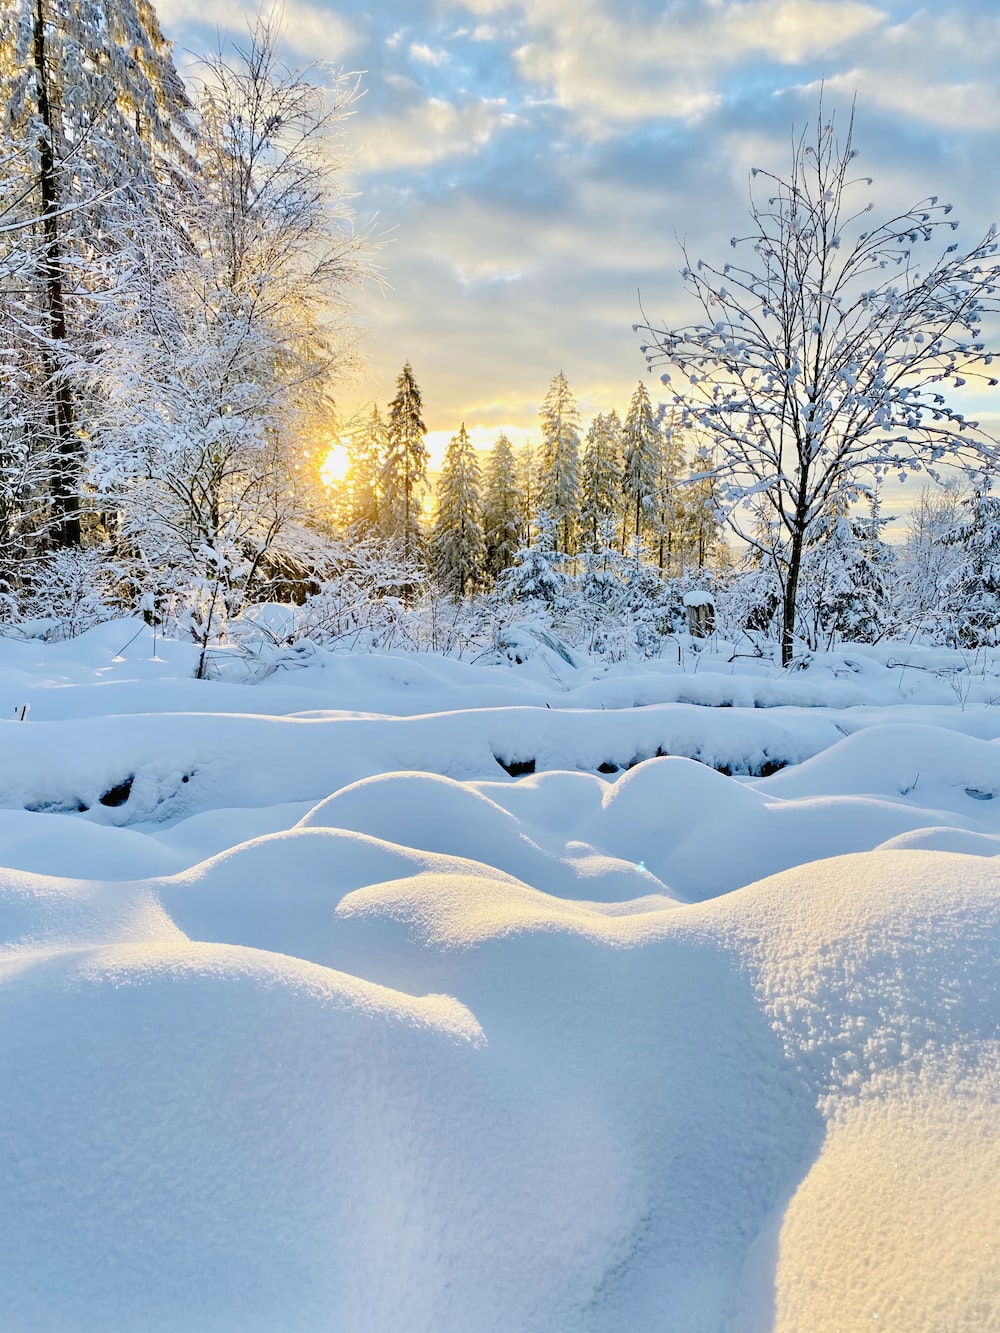 Winter Scenery Picture. Download Free Image